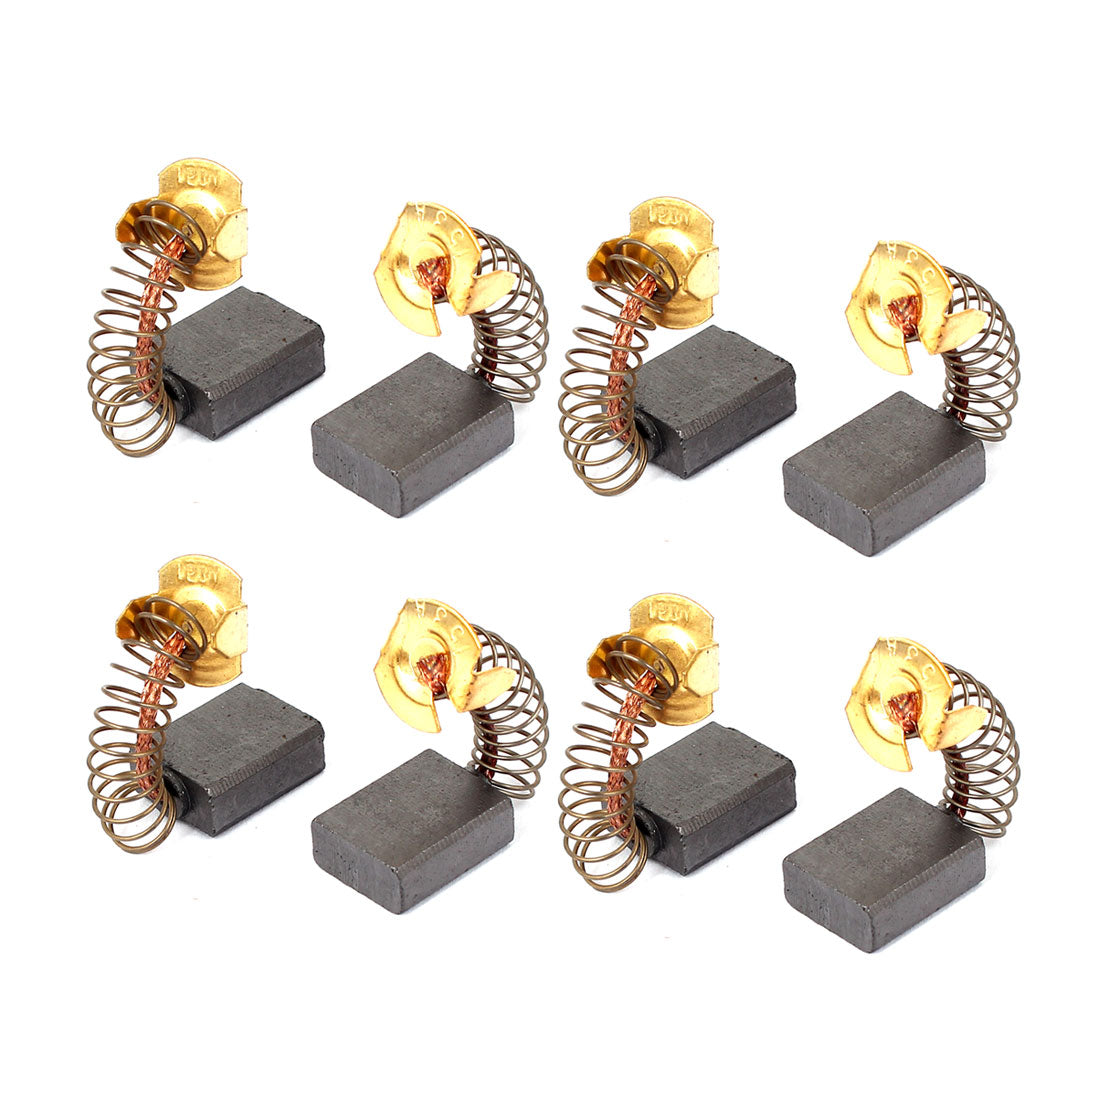 uxcell Uxcell 8 Pcs Replacement Motor Carbon Brushes 17mm x 13mm x 6mm for Electric Motors